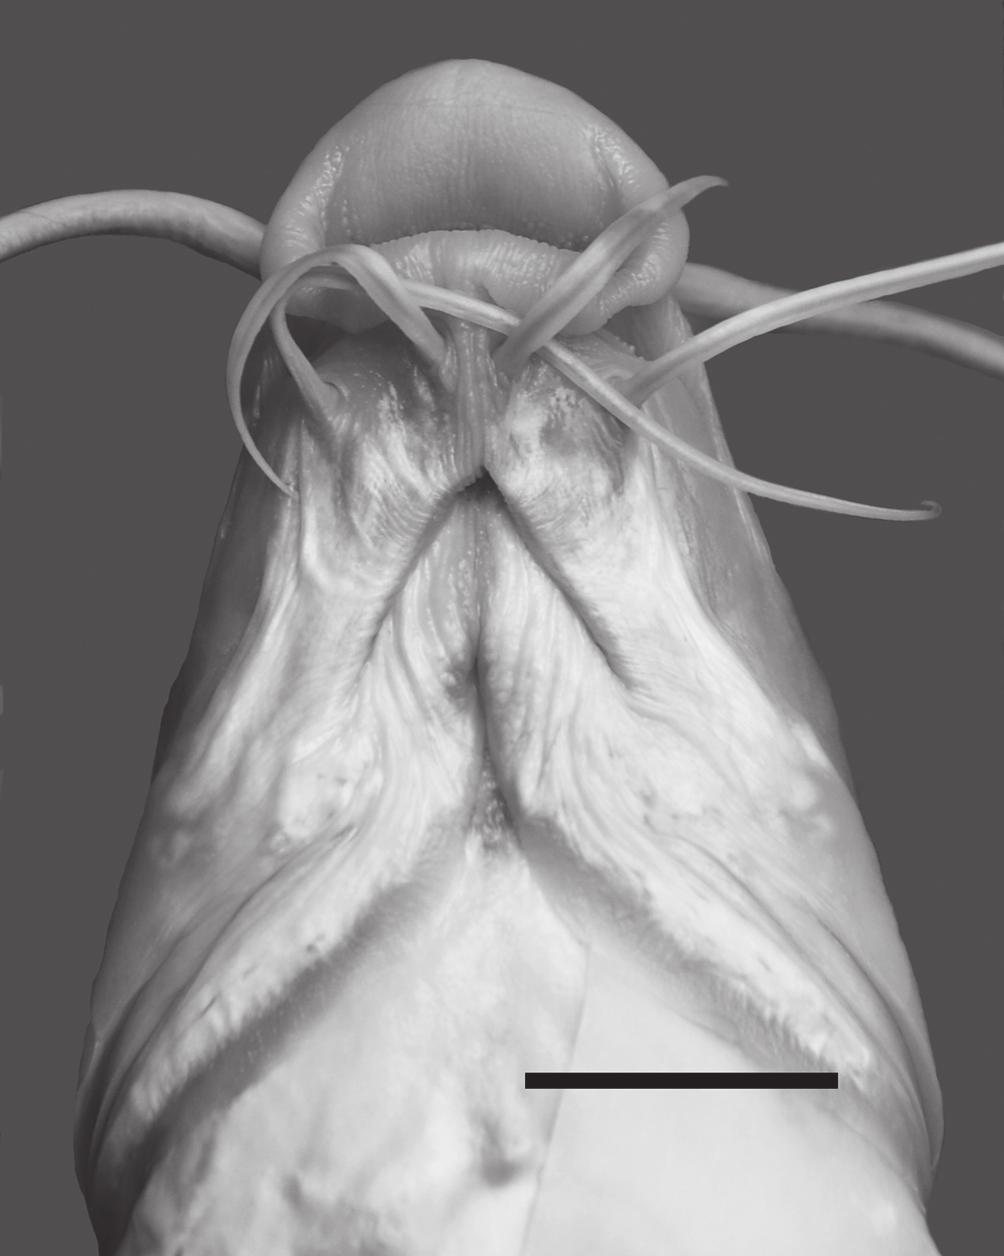 Snout long, pointed (contained 1.9-2.2 times in HL). Anterior cranial fontanelle narrow, oval, anterior margin nearer to posterior nostril than eye and finished before posterior margin of eye.